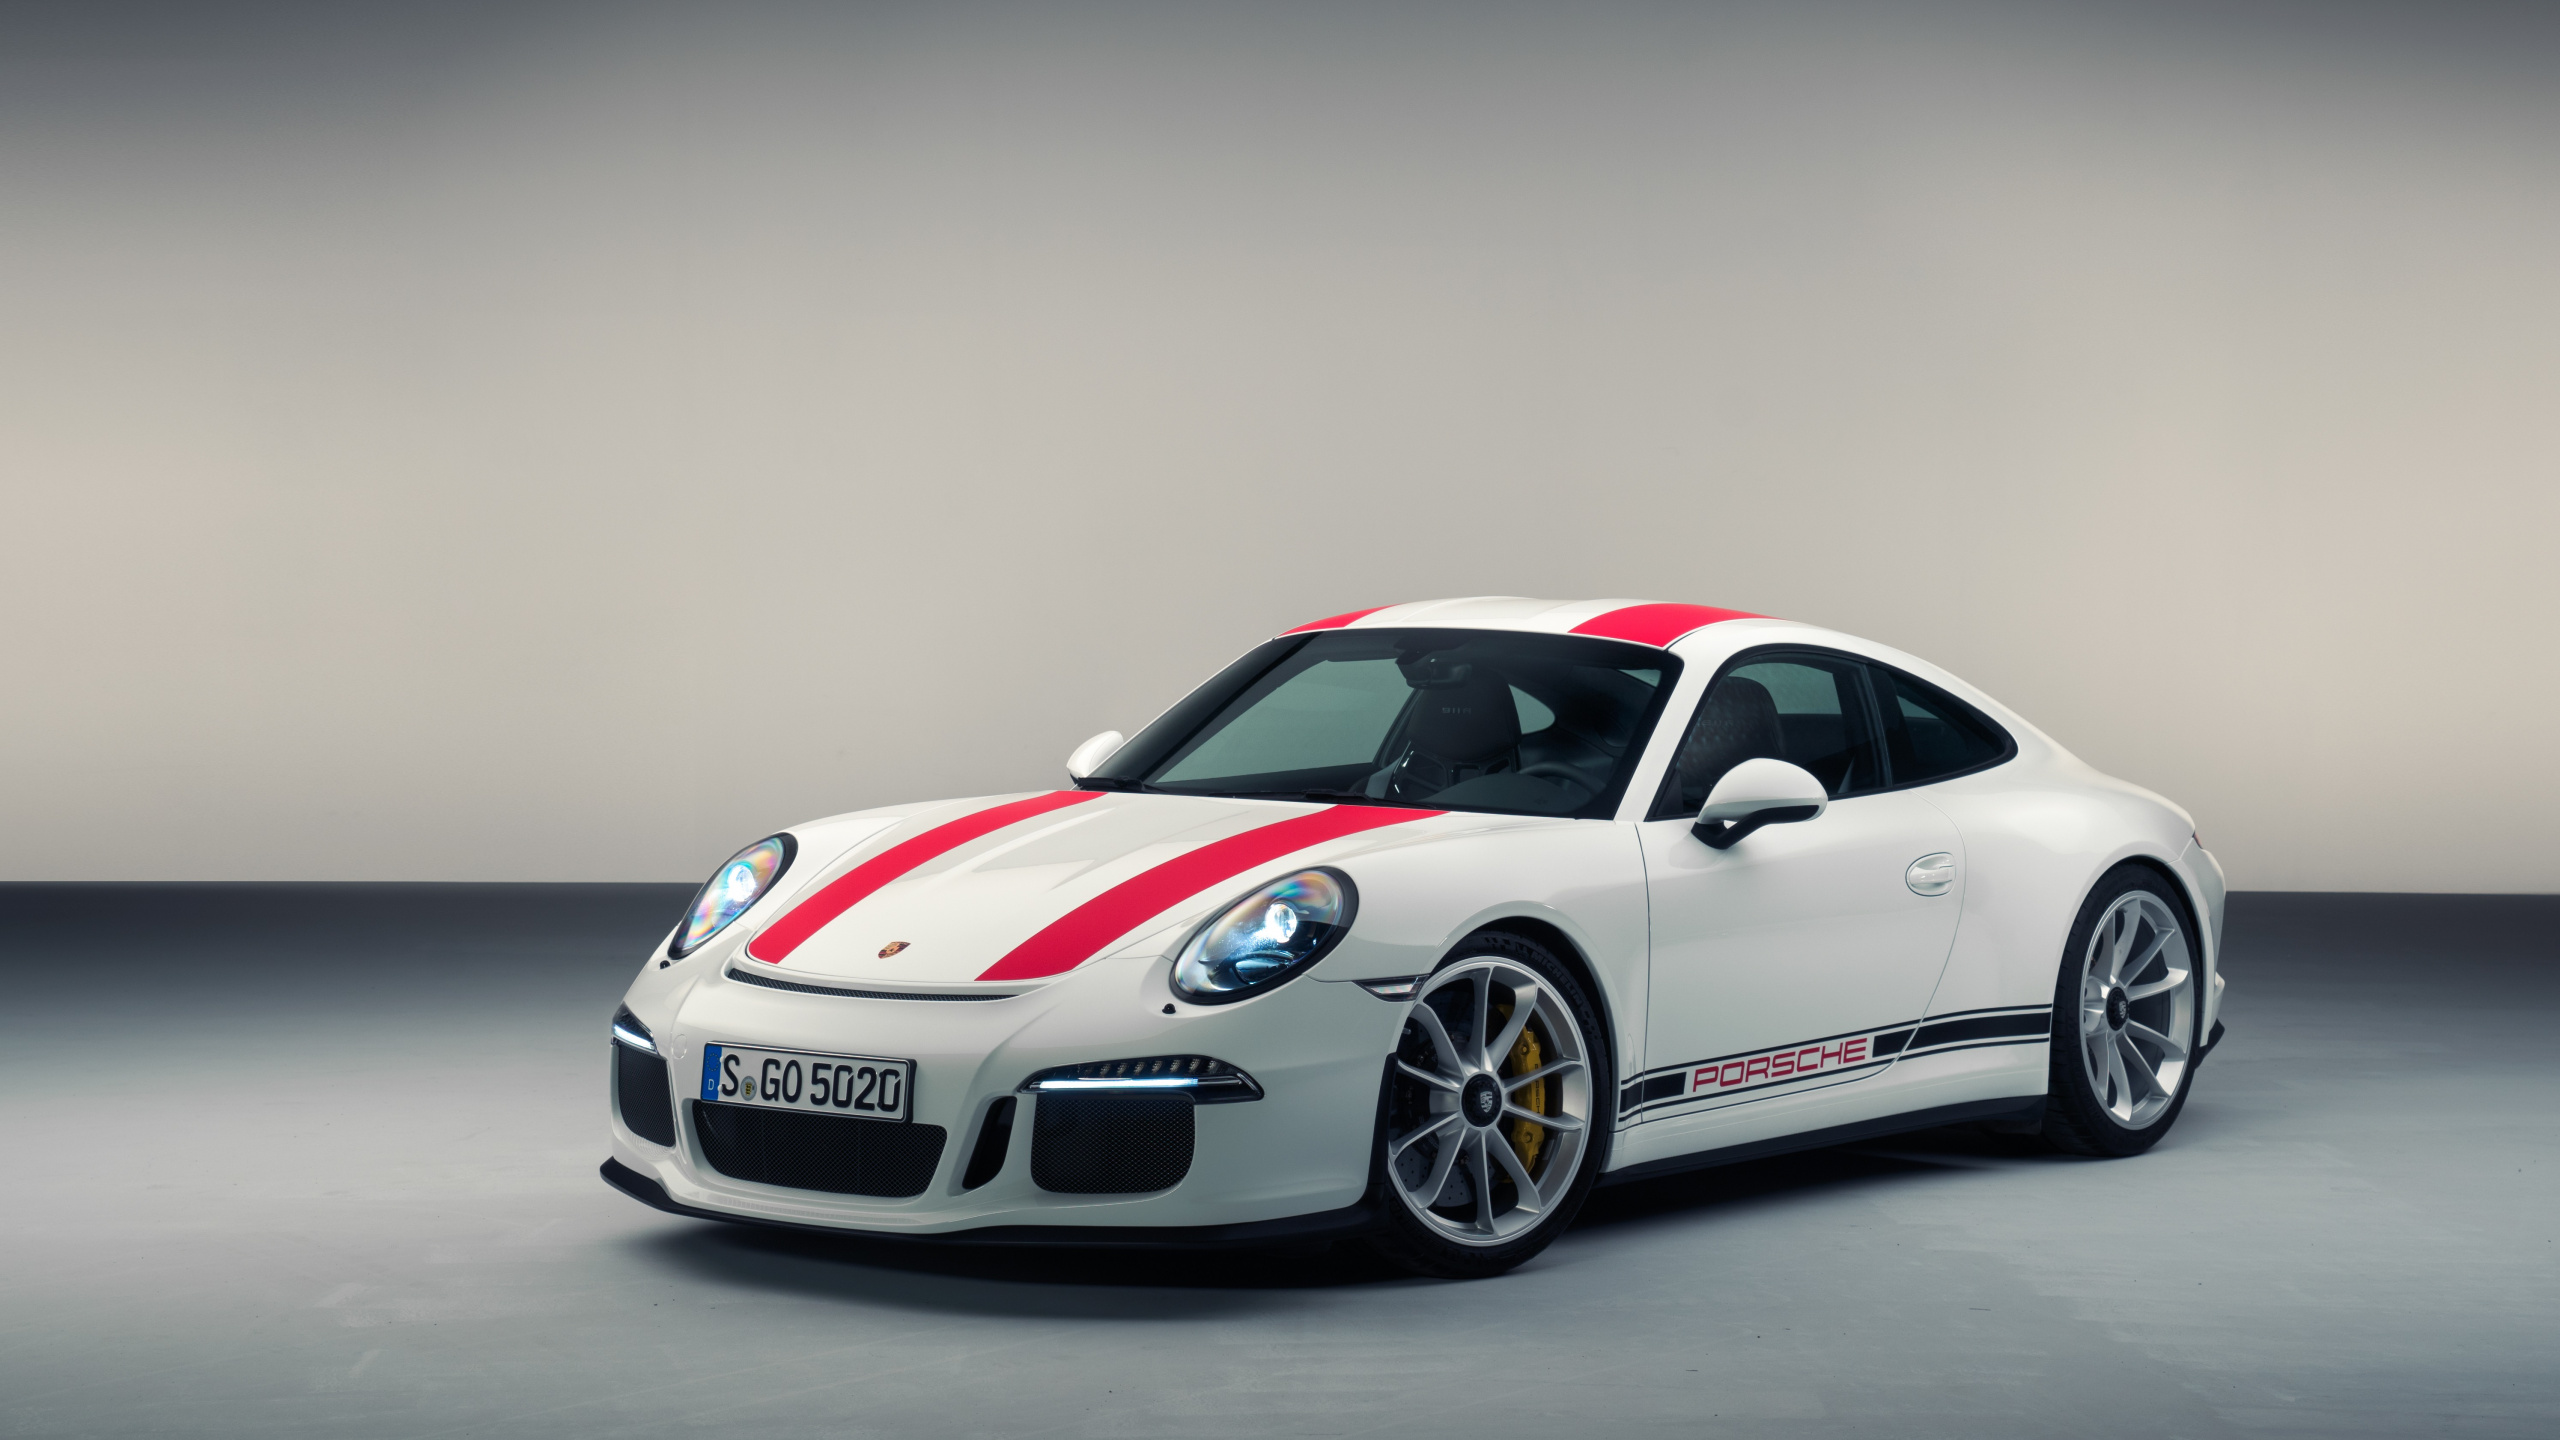 White and Red Porsche 911. Wallpaper in 2560x1440 Resolution